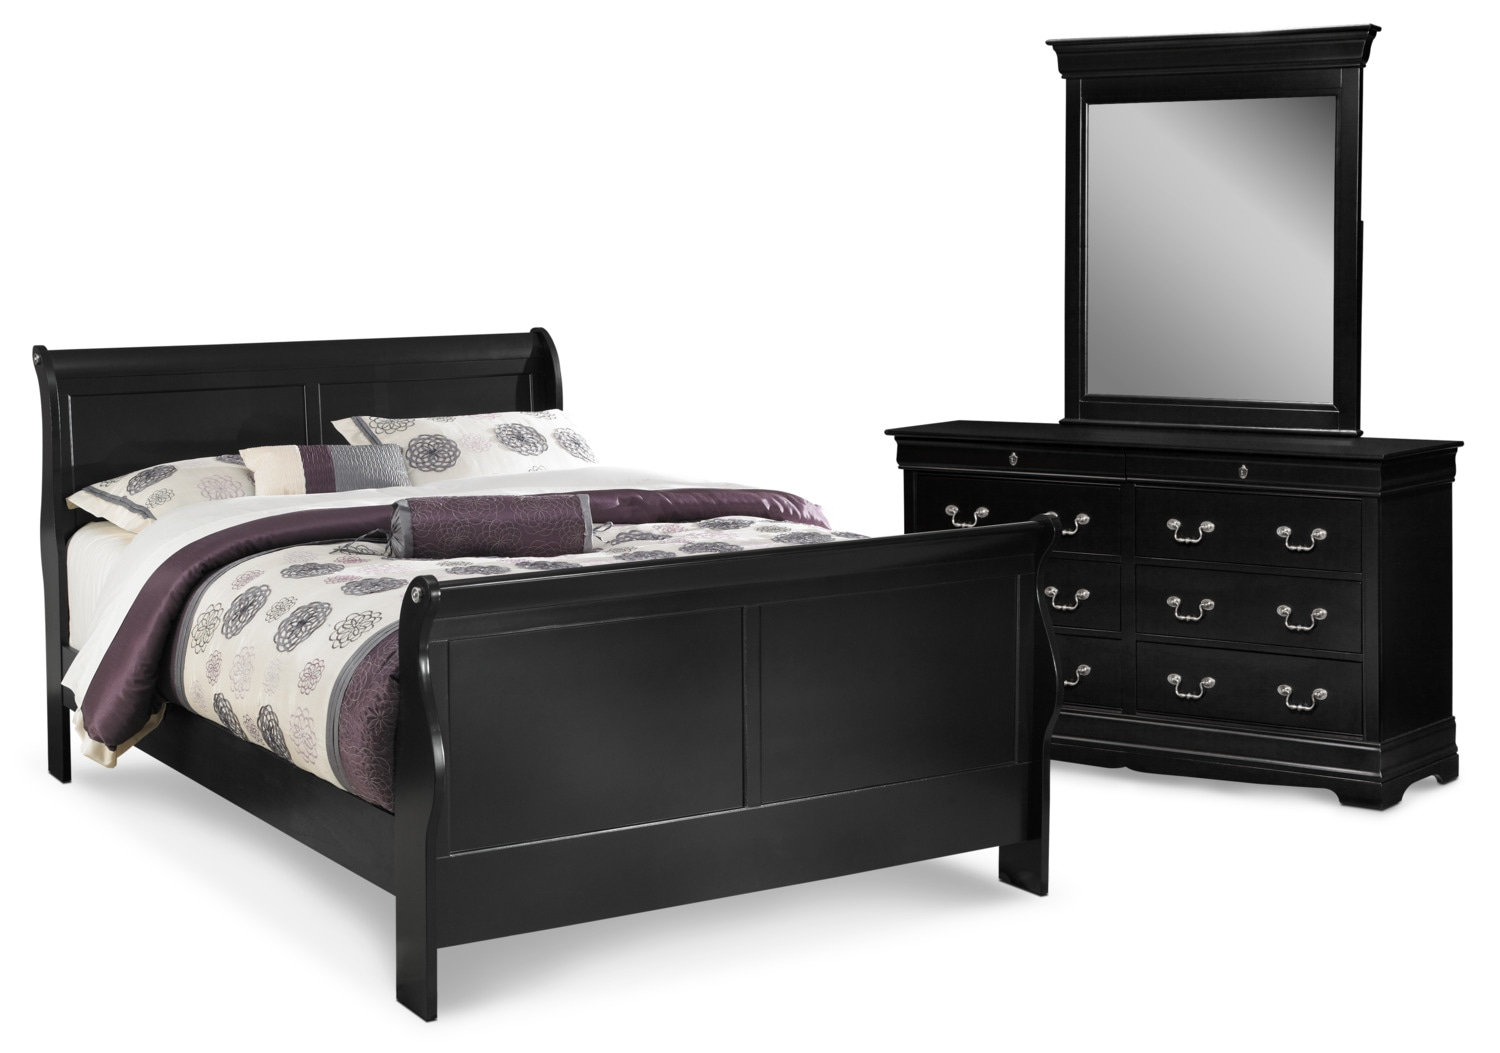 Neo Classic 5 Piece Bedroom Set With Dresser And Mirror intended for dimensions 1500 X 1053